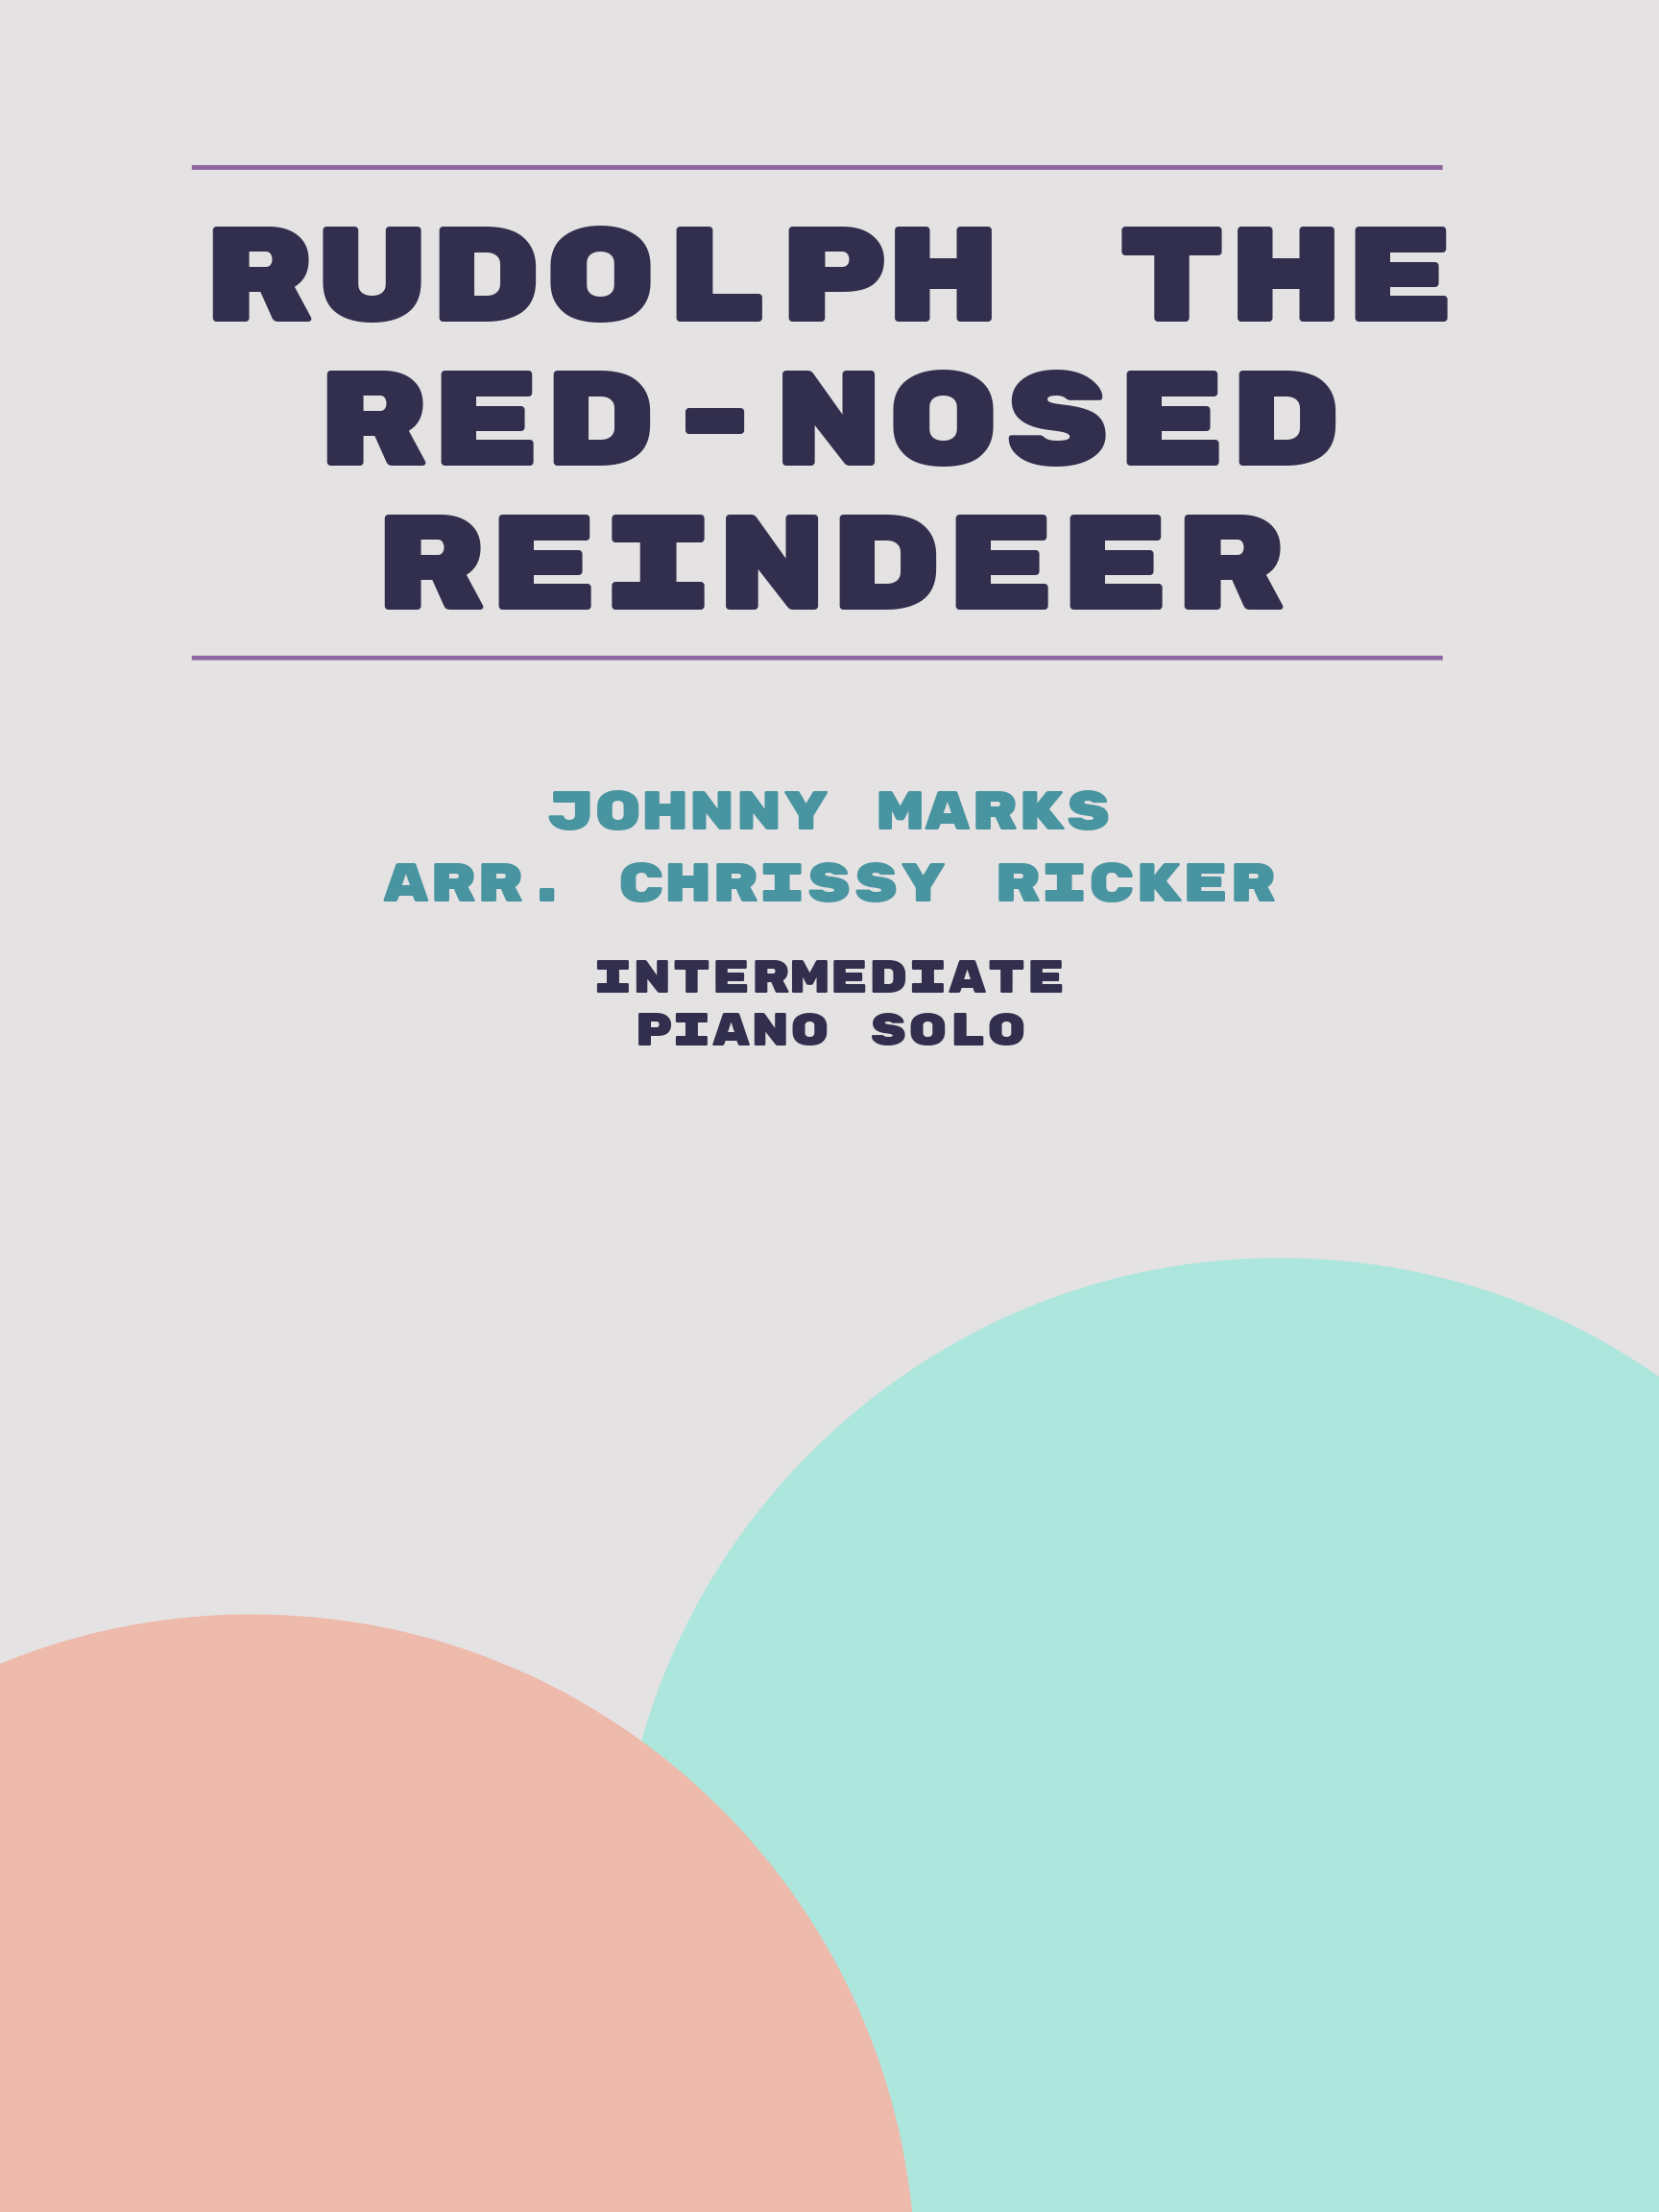 Rudolph the Red-Nosed Reindeer by Johnny Marks